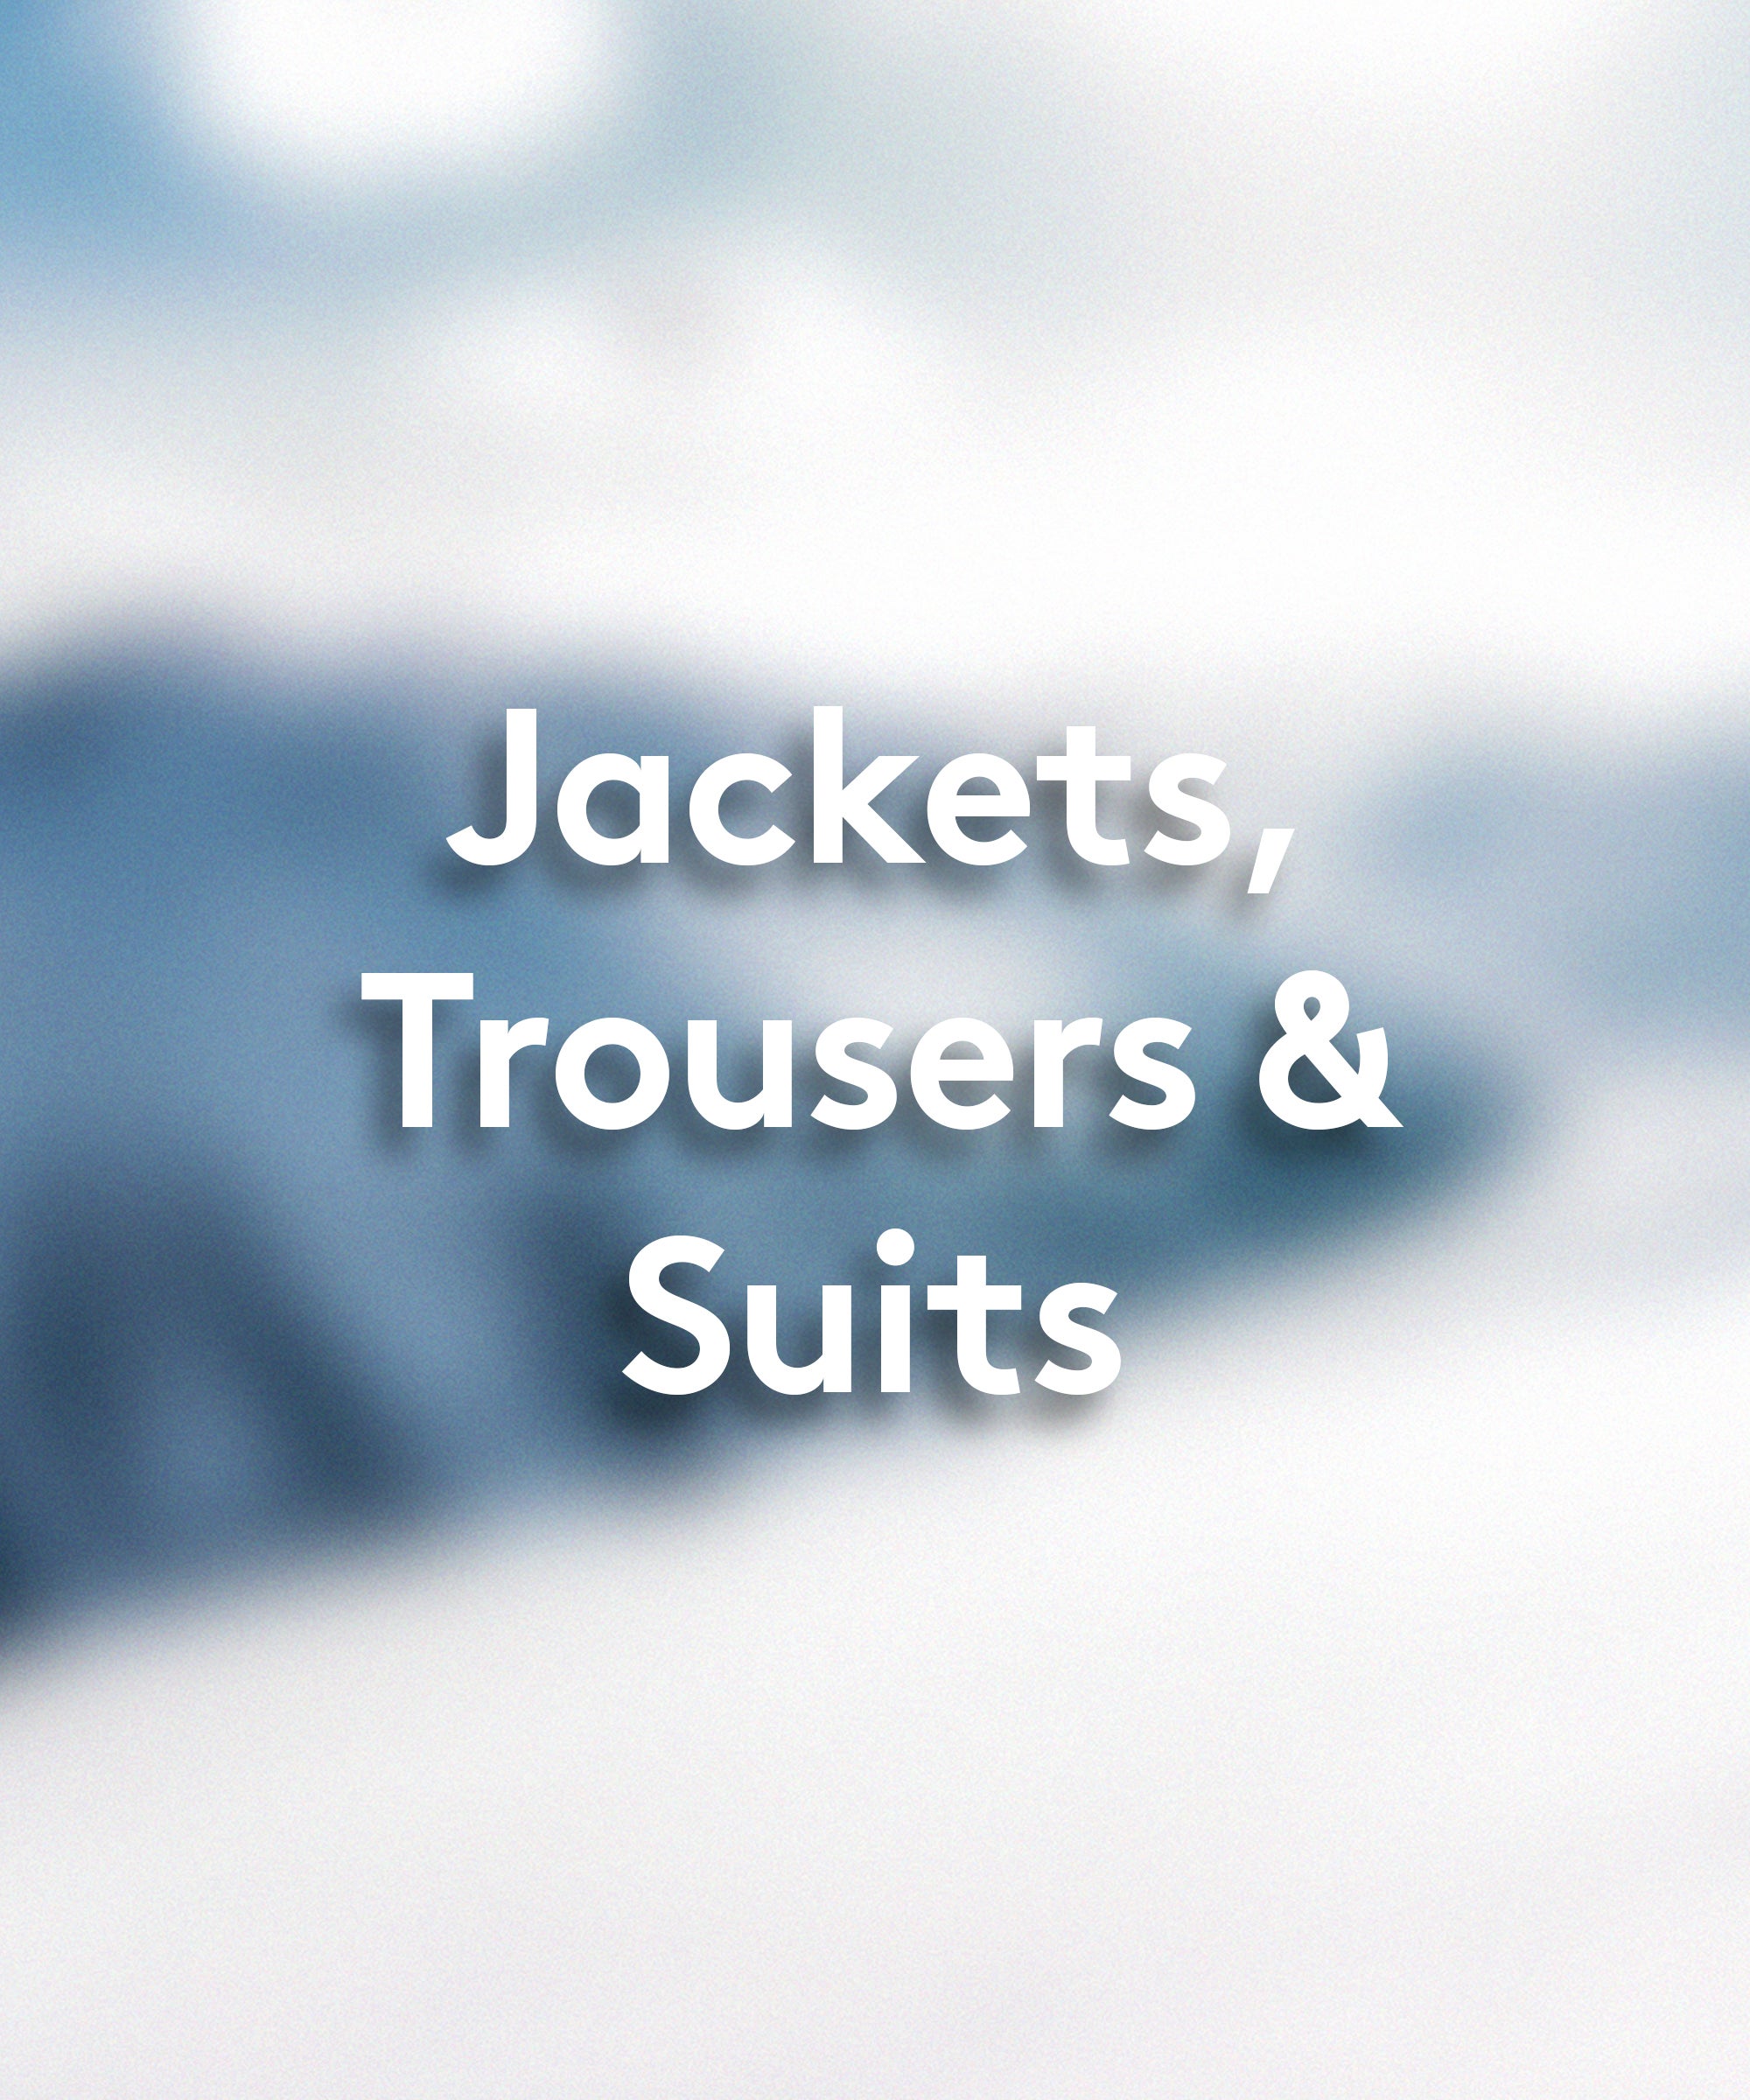 Best Women's Ski Wear - What To Pack For Skiing Trip